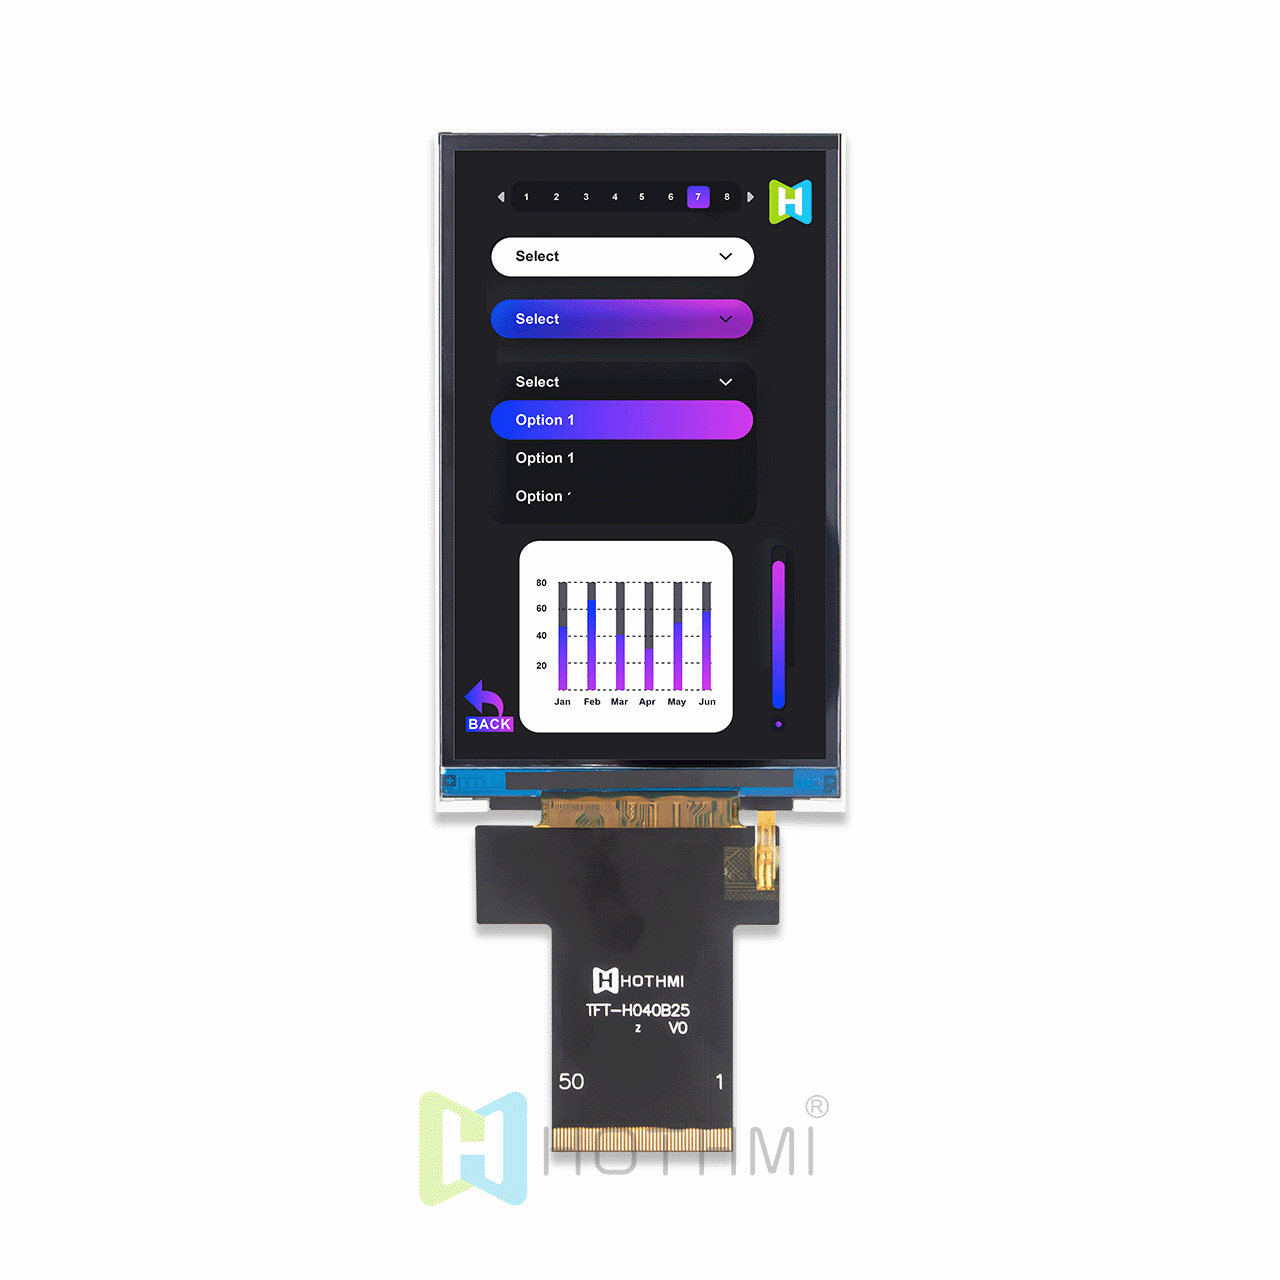 <p>Introducing the TFT-H050A12FWIST4C40: Your Industrial Computing Solution</p><p>Enhance your industrial computer systems with the cutting-edge TFT-H050A12FWIST4C40 5.0 Inch IPS TFT Display Panel. Designed to withstand the most demandin